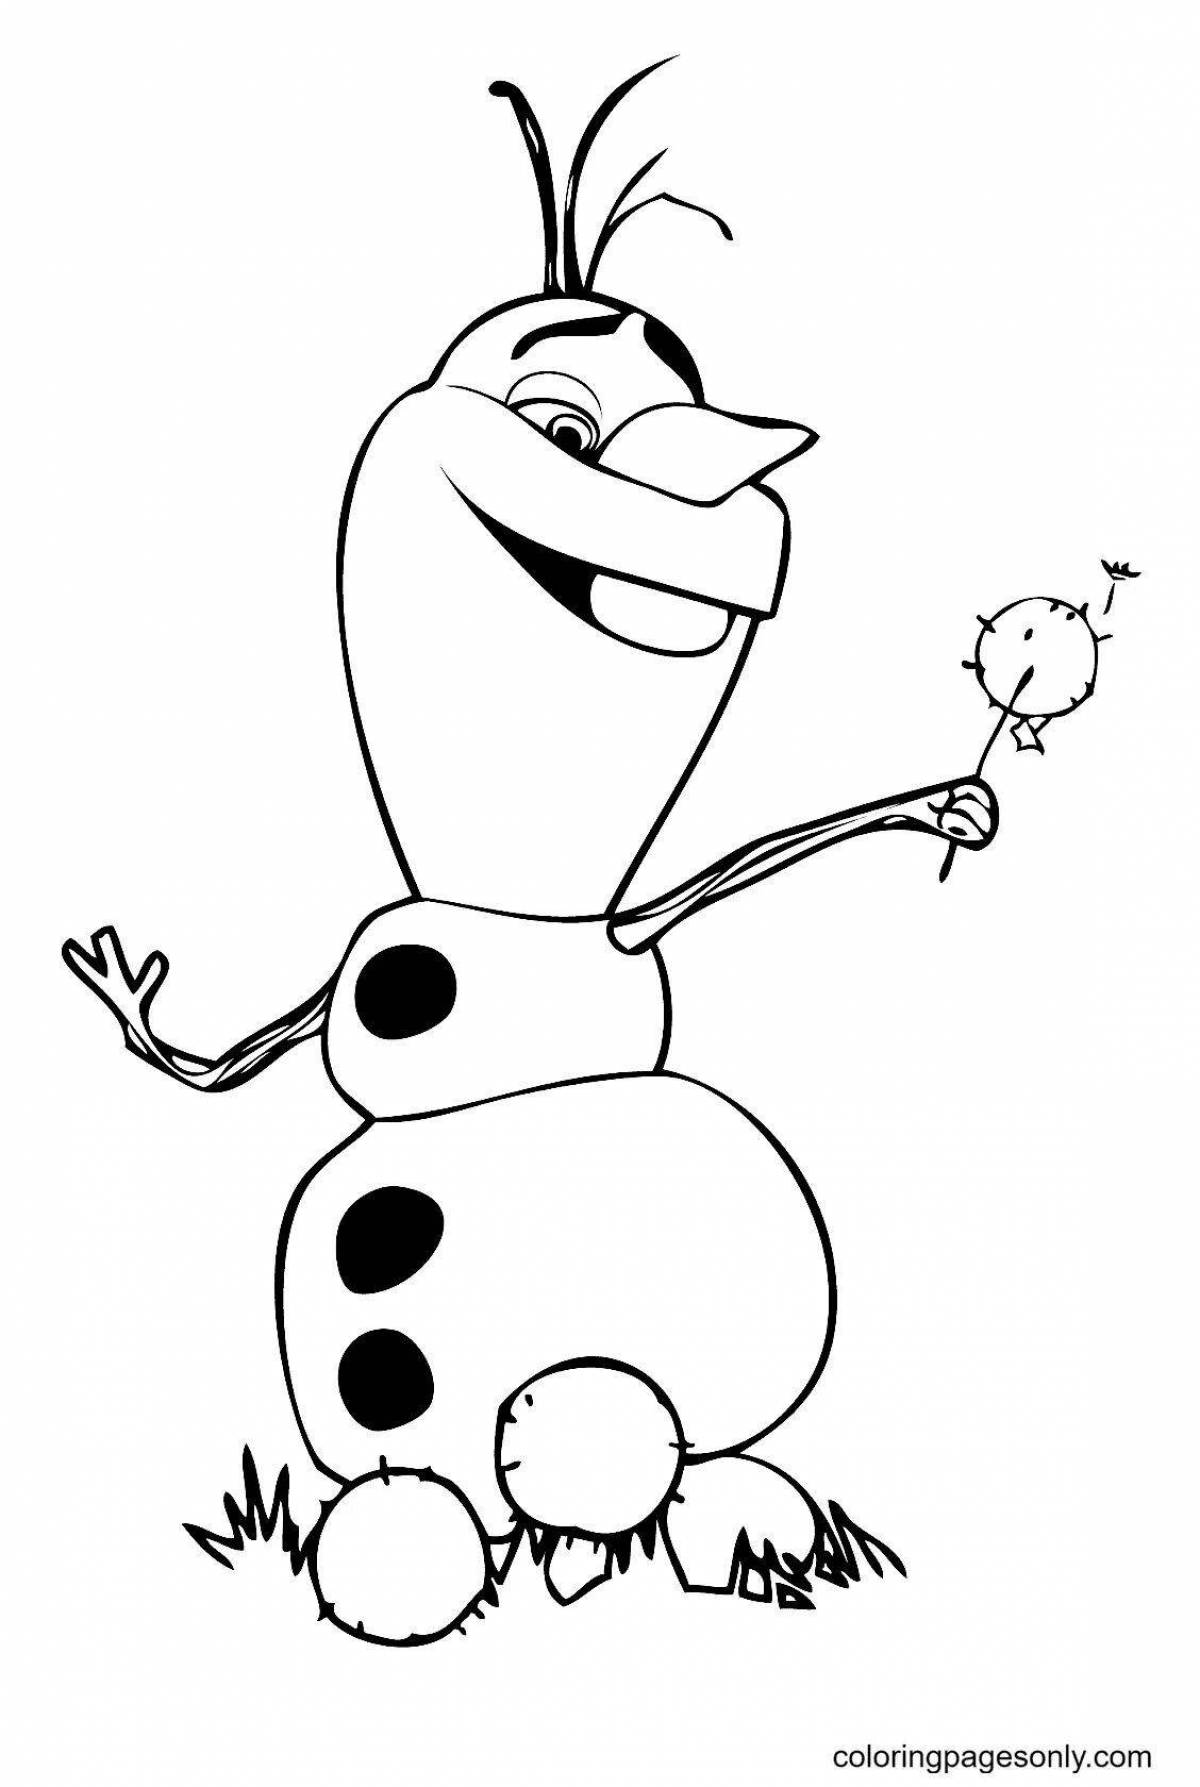 Lively snowman olaf coloring